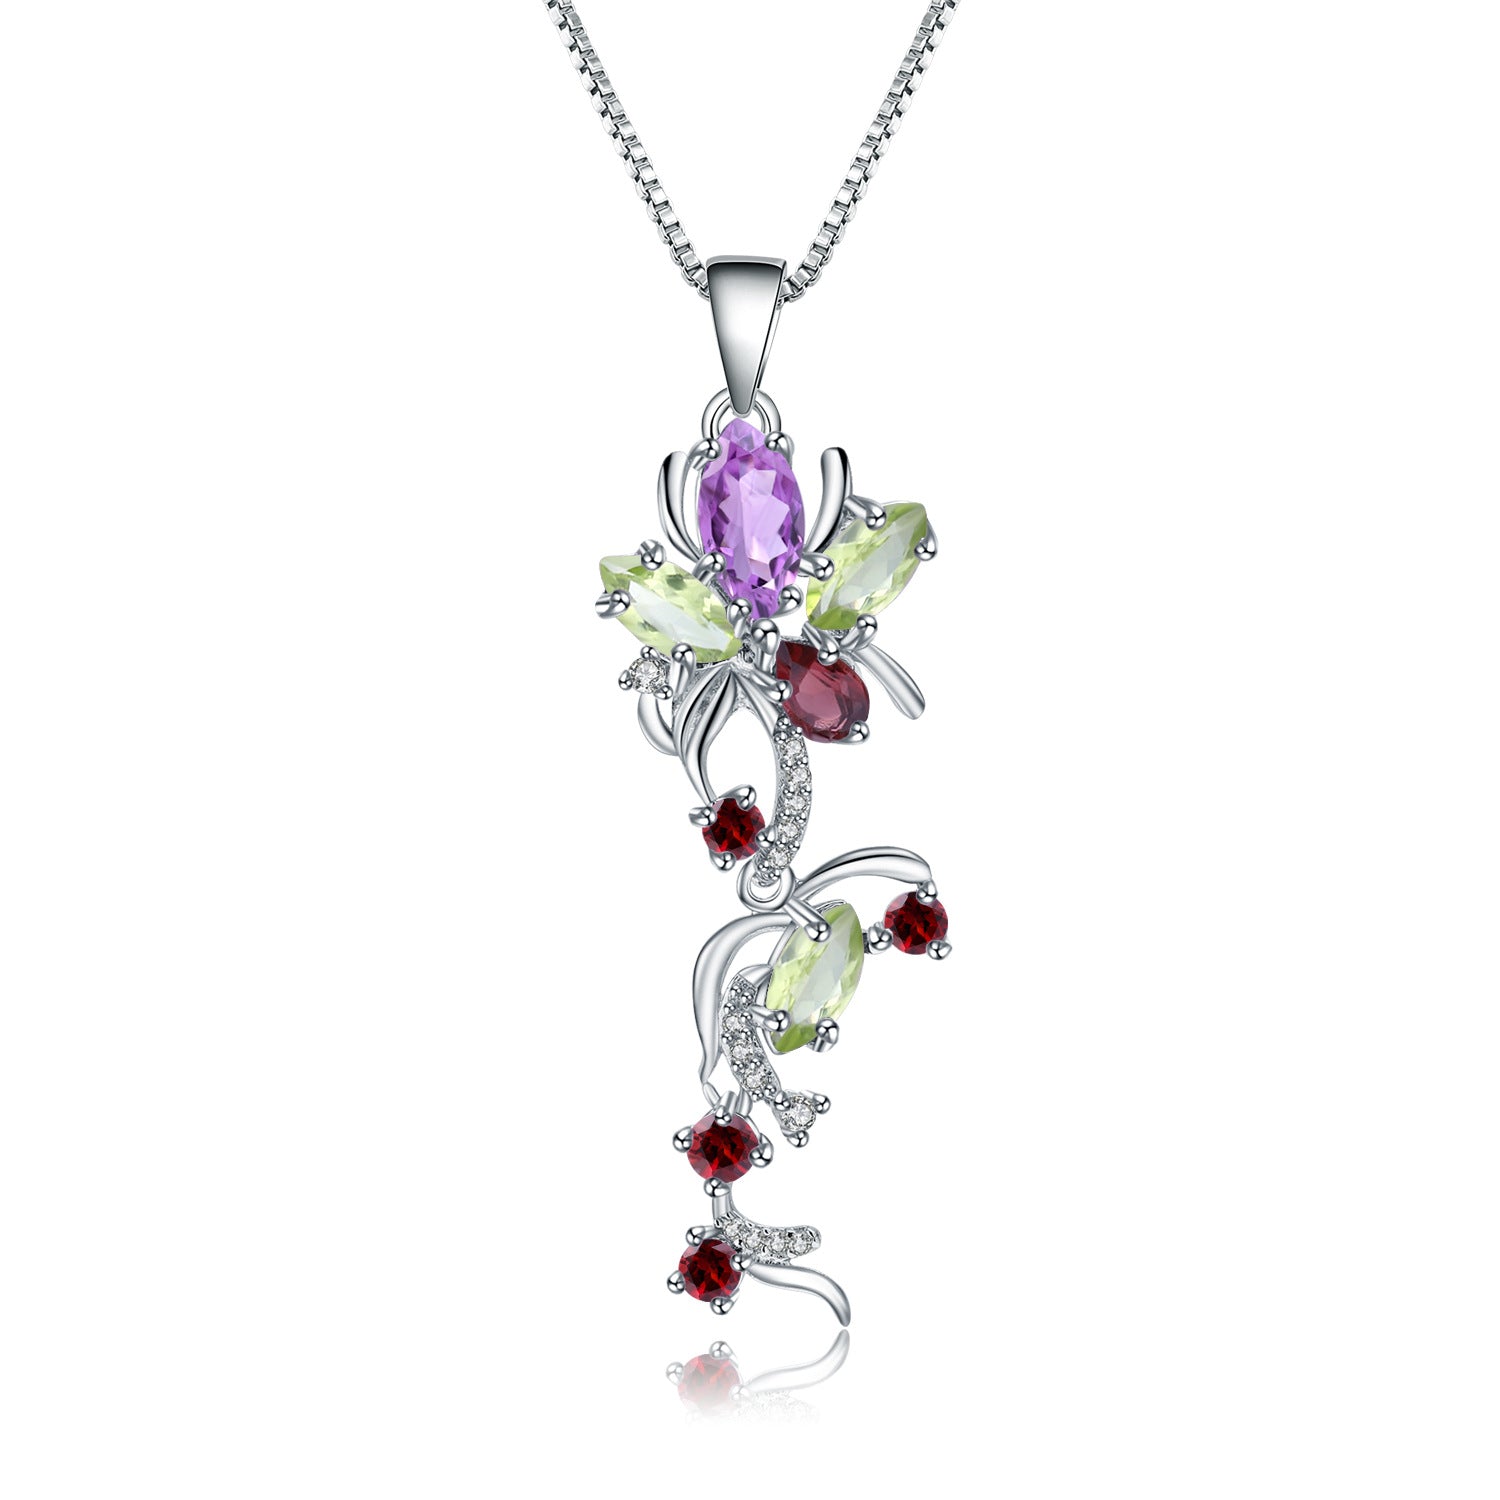 European Original Jewelry Design Inlaid Colourful Gemstone Sterling Silver Necklace for Women